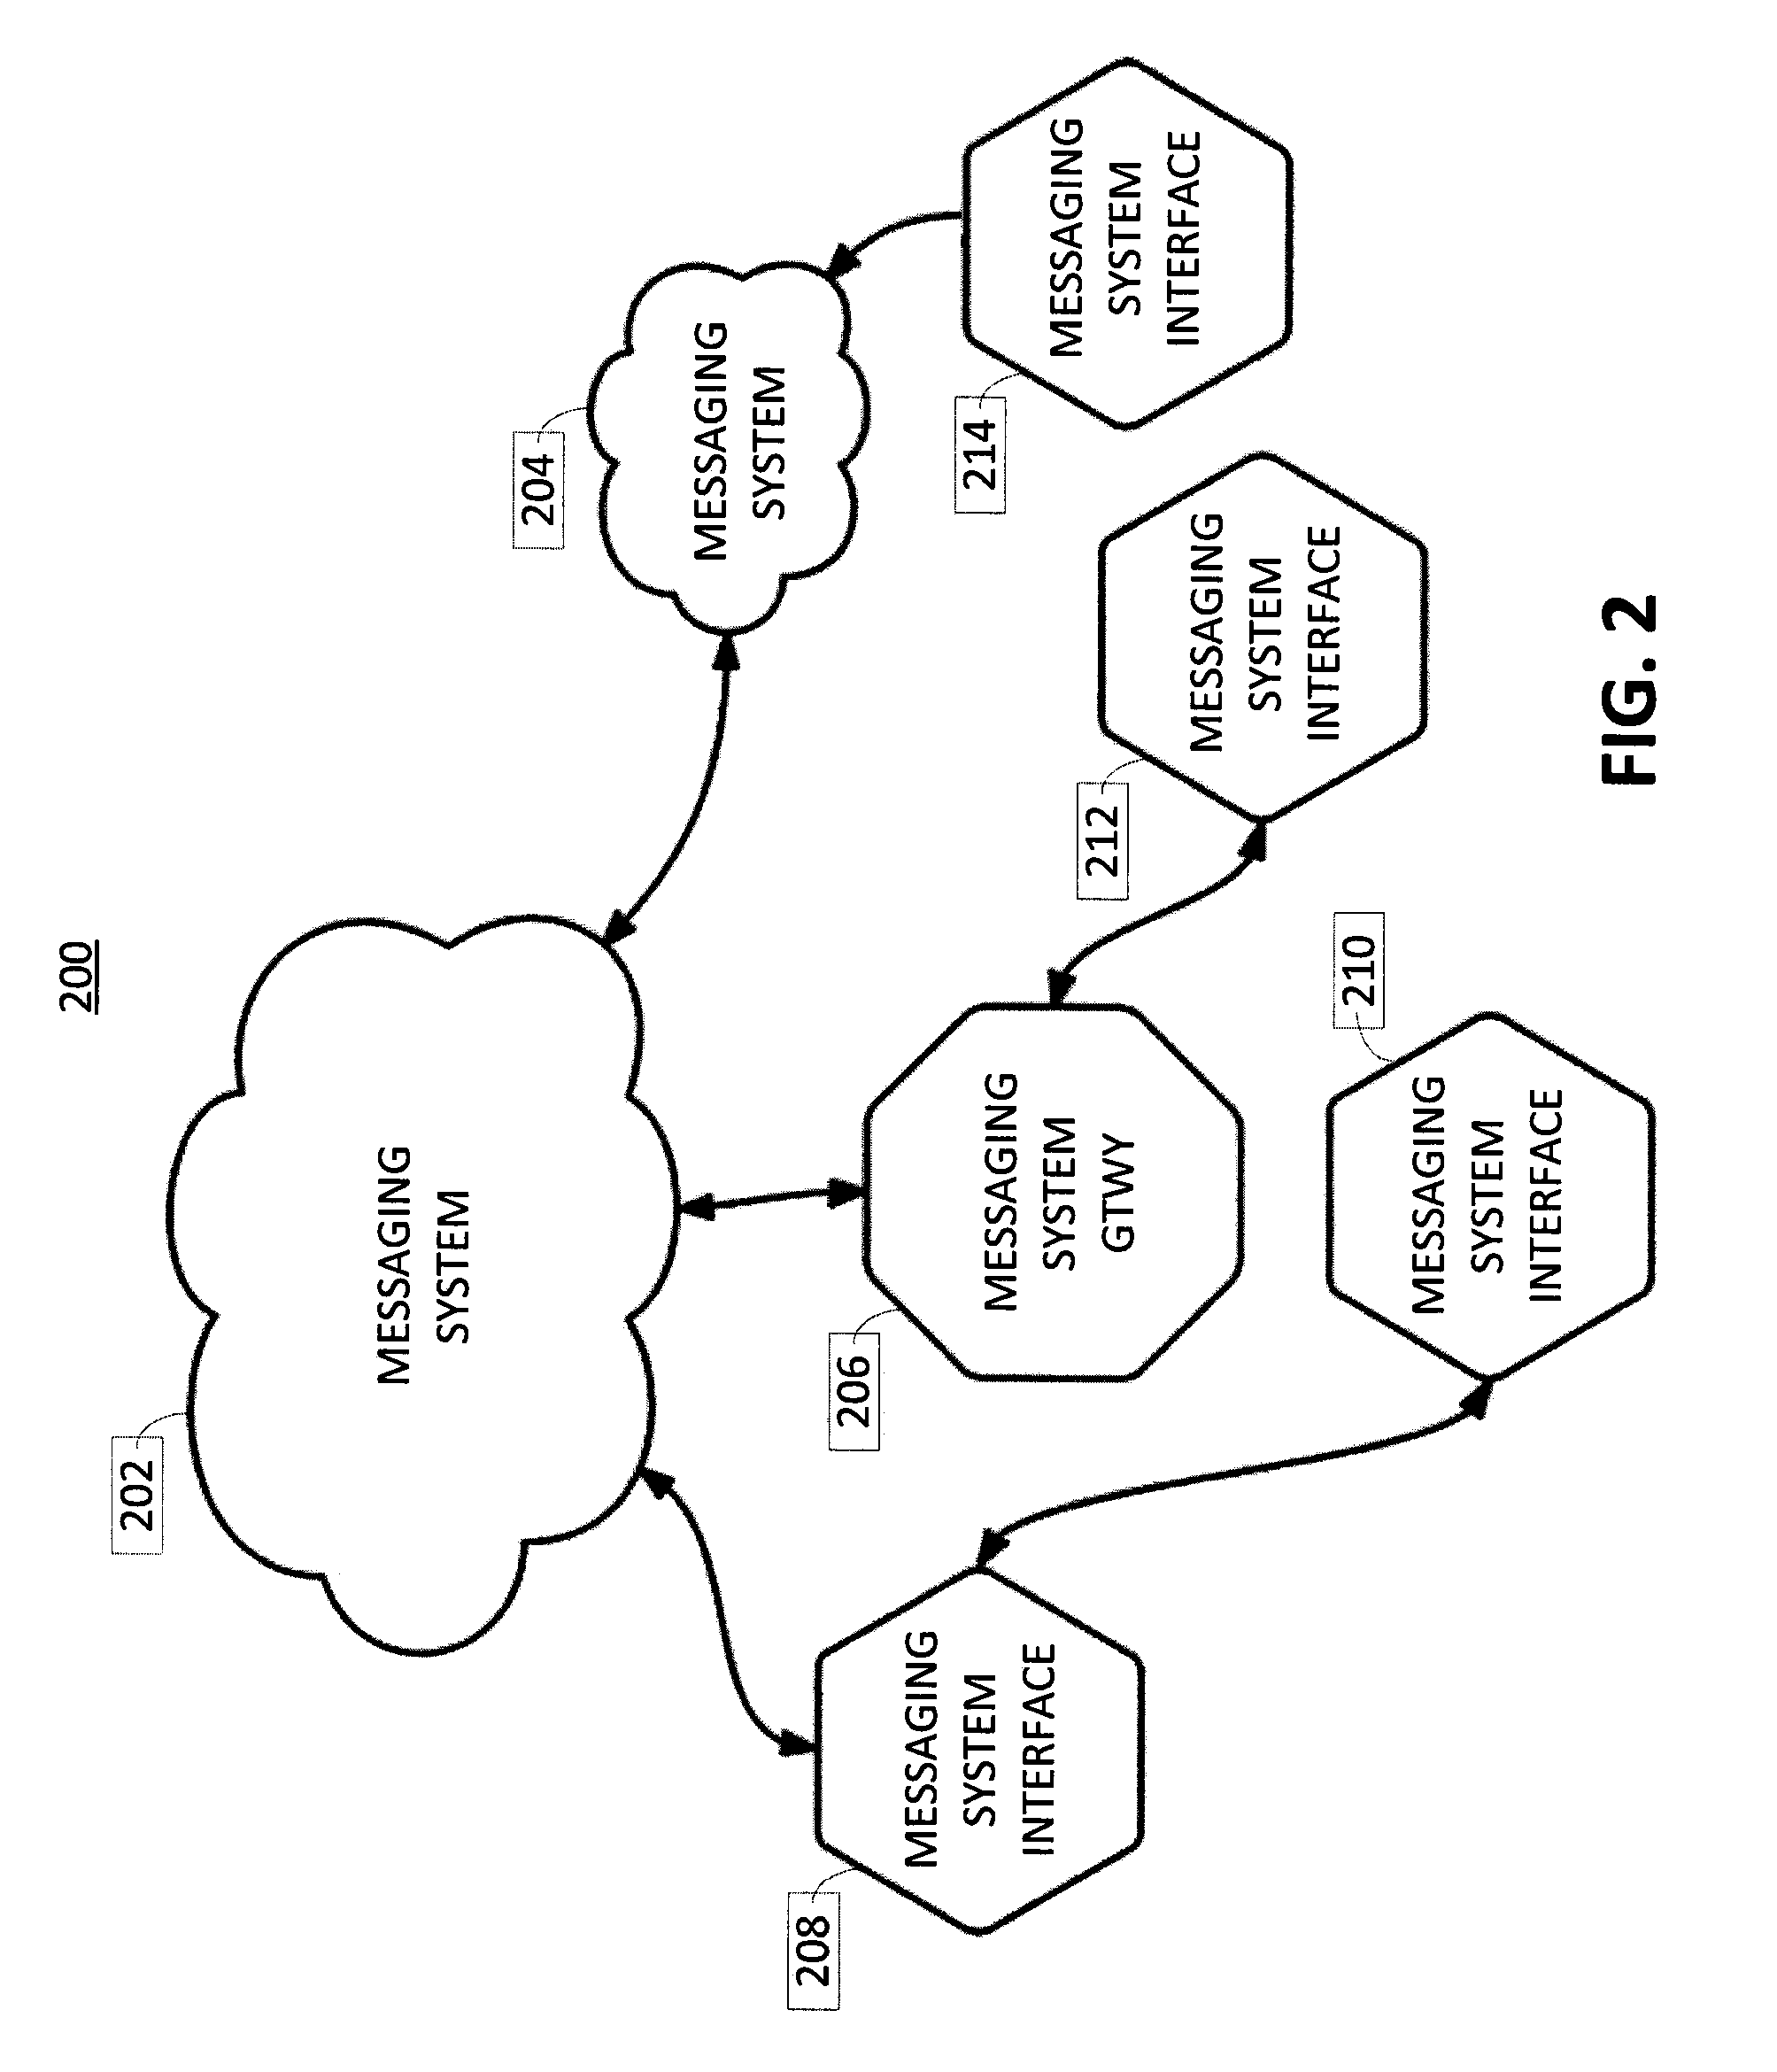 Location assistance in a machine to machine instant messaging system